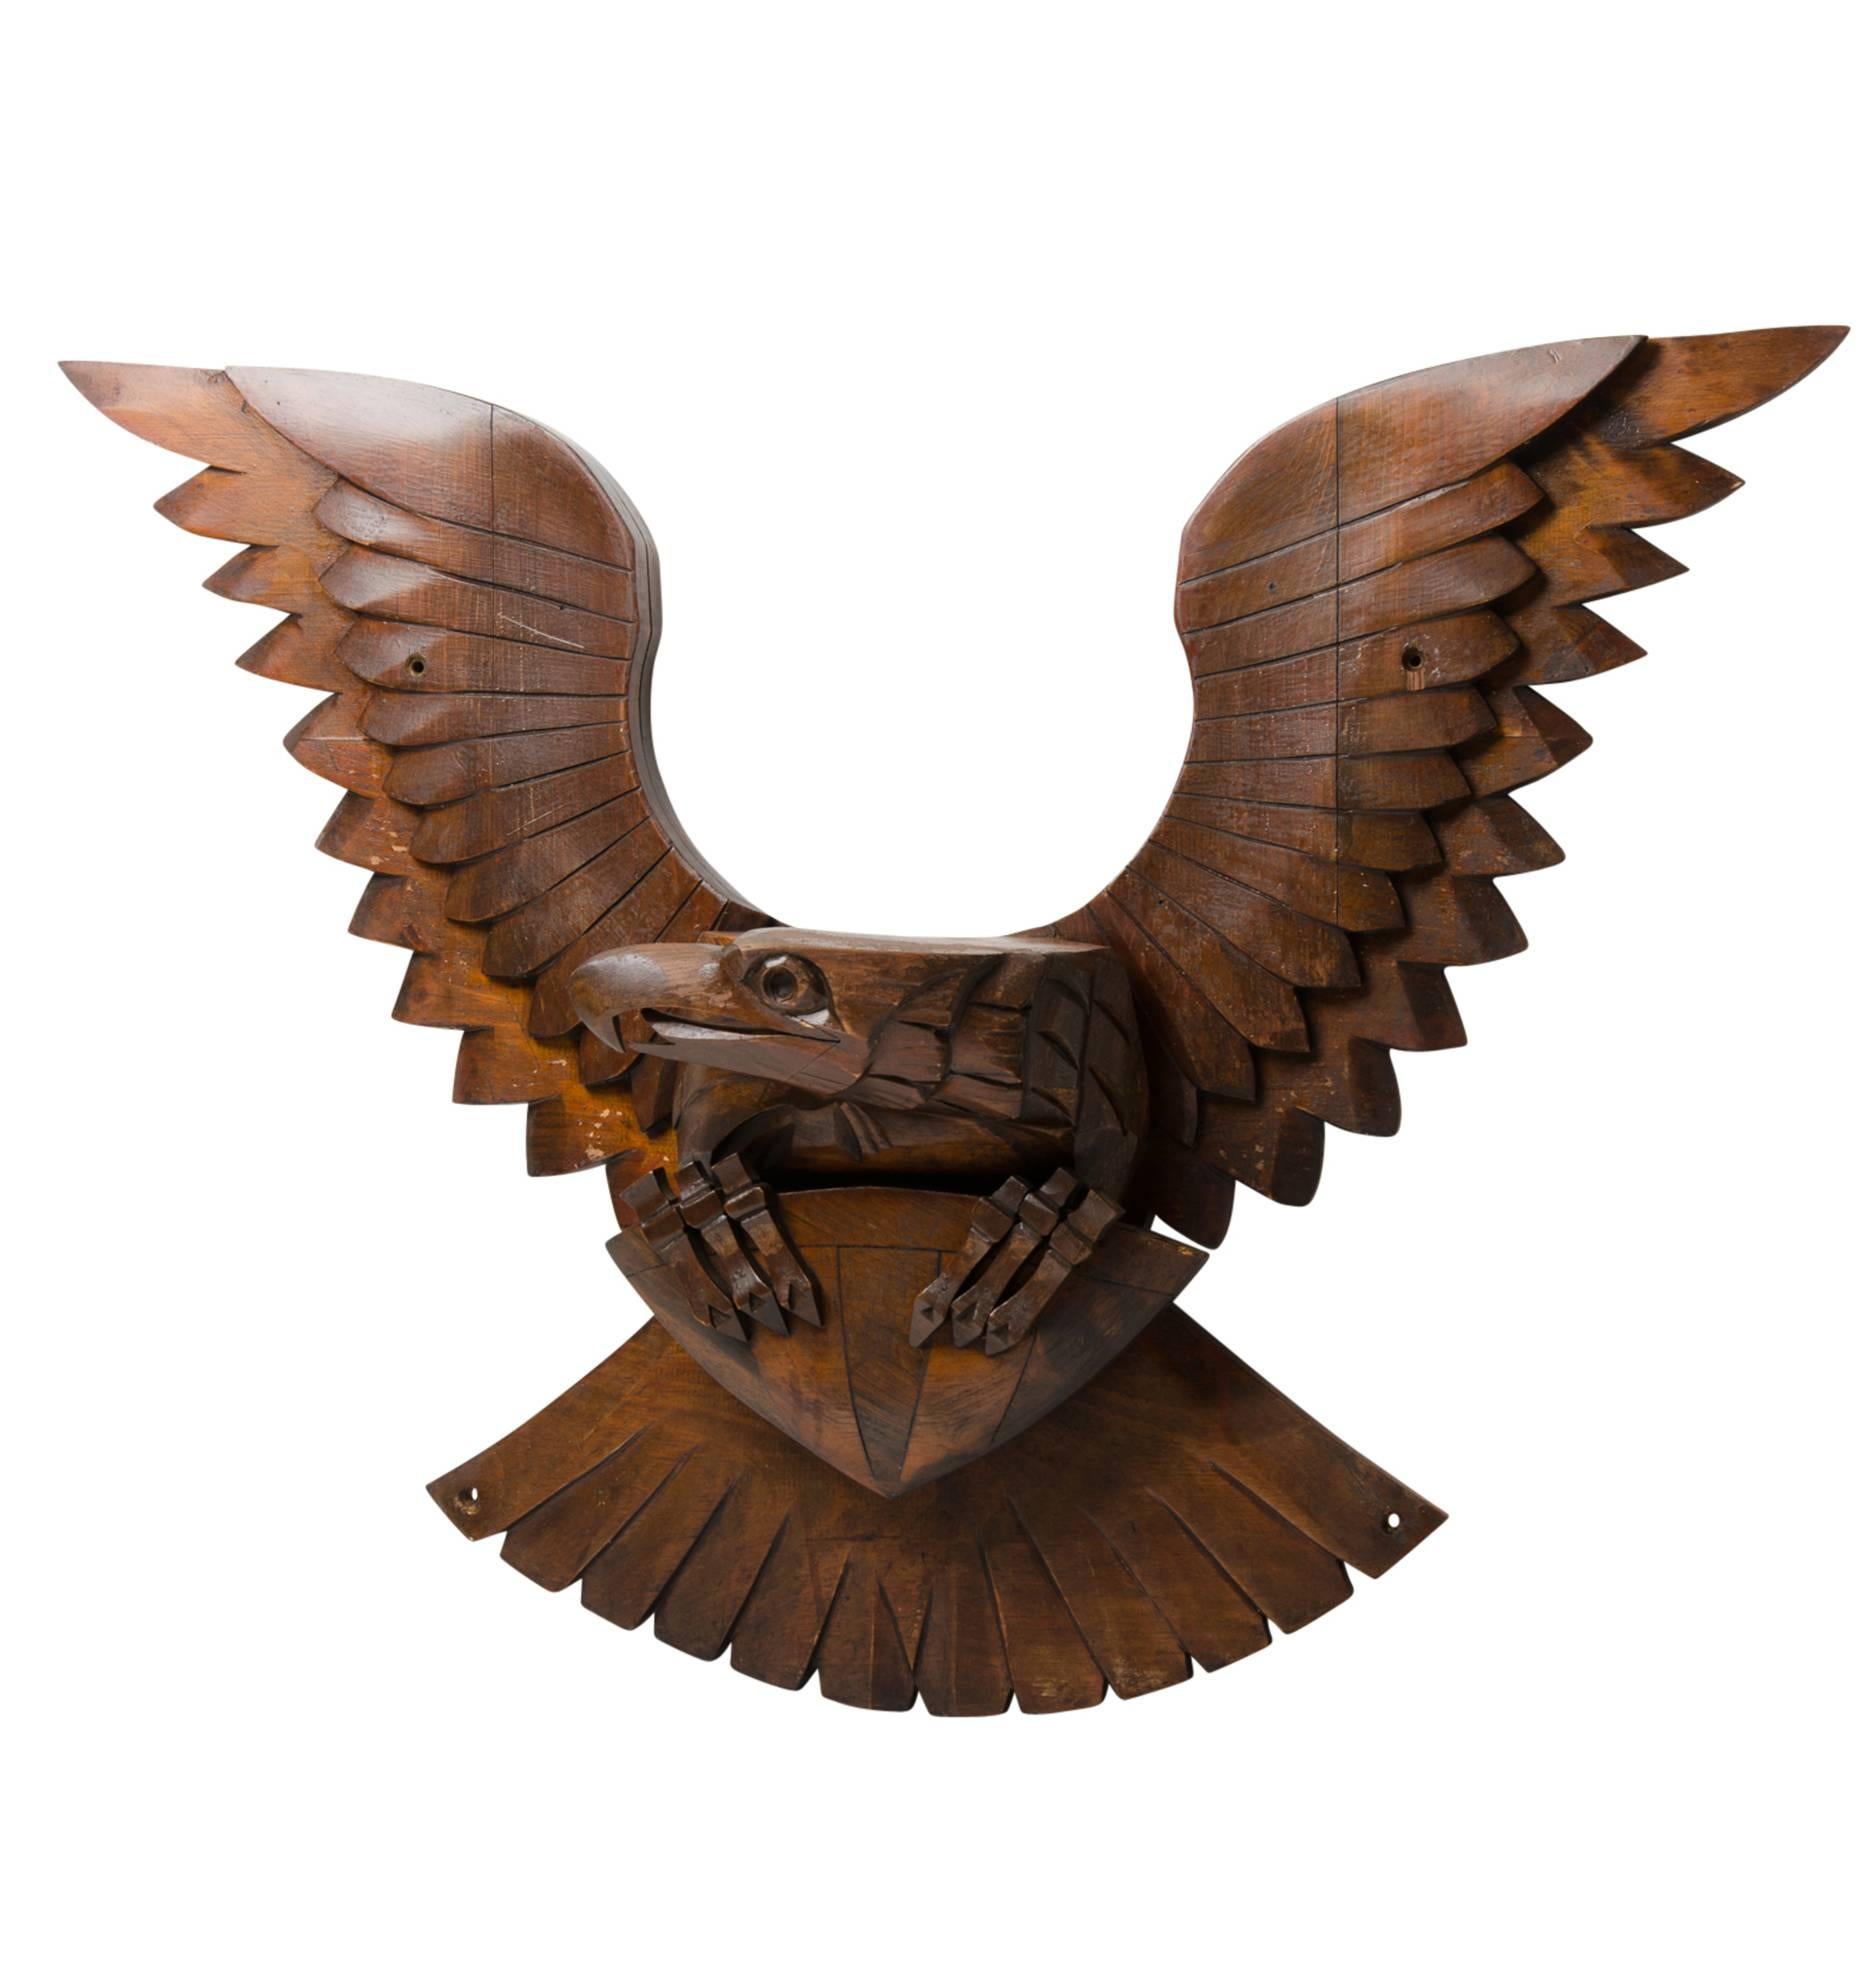 Majestic and proud, this large eagle crest spans 43 1/4